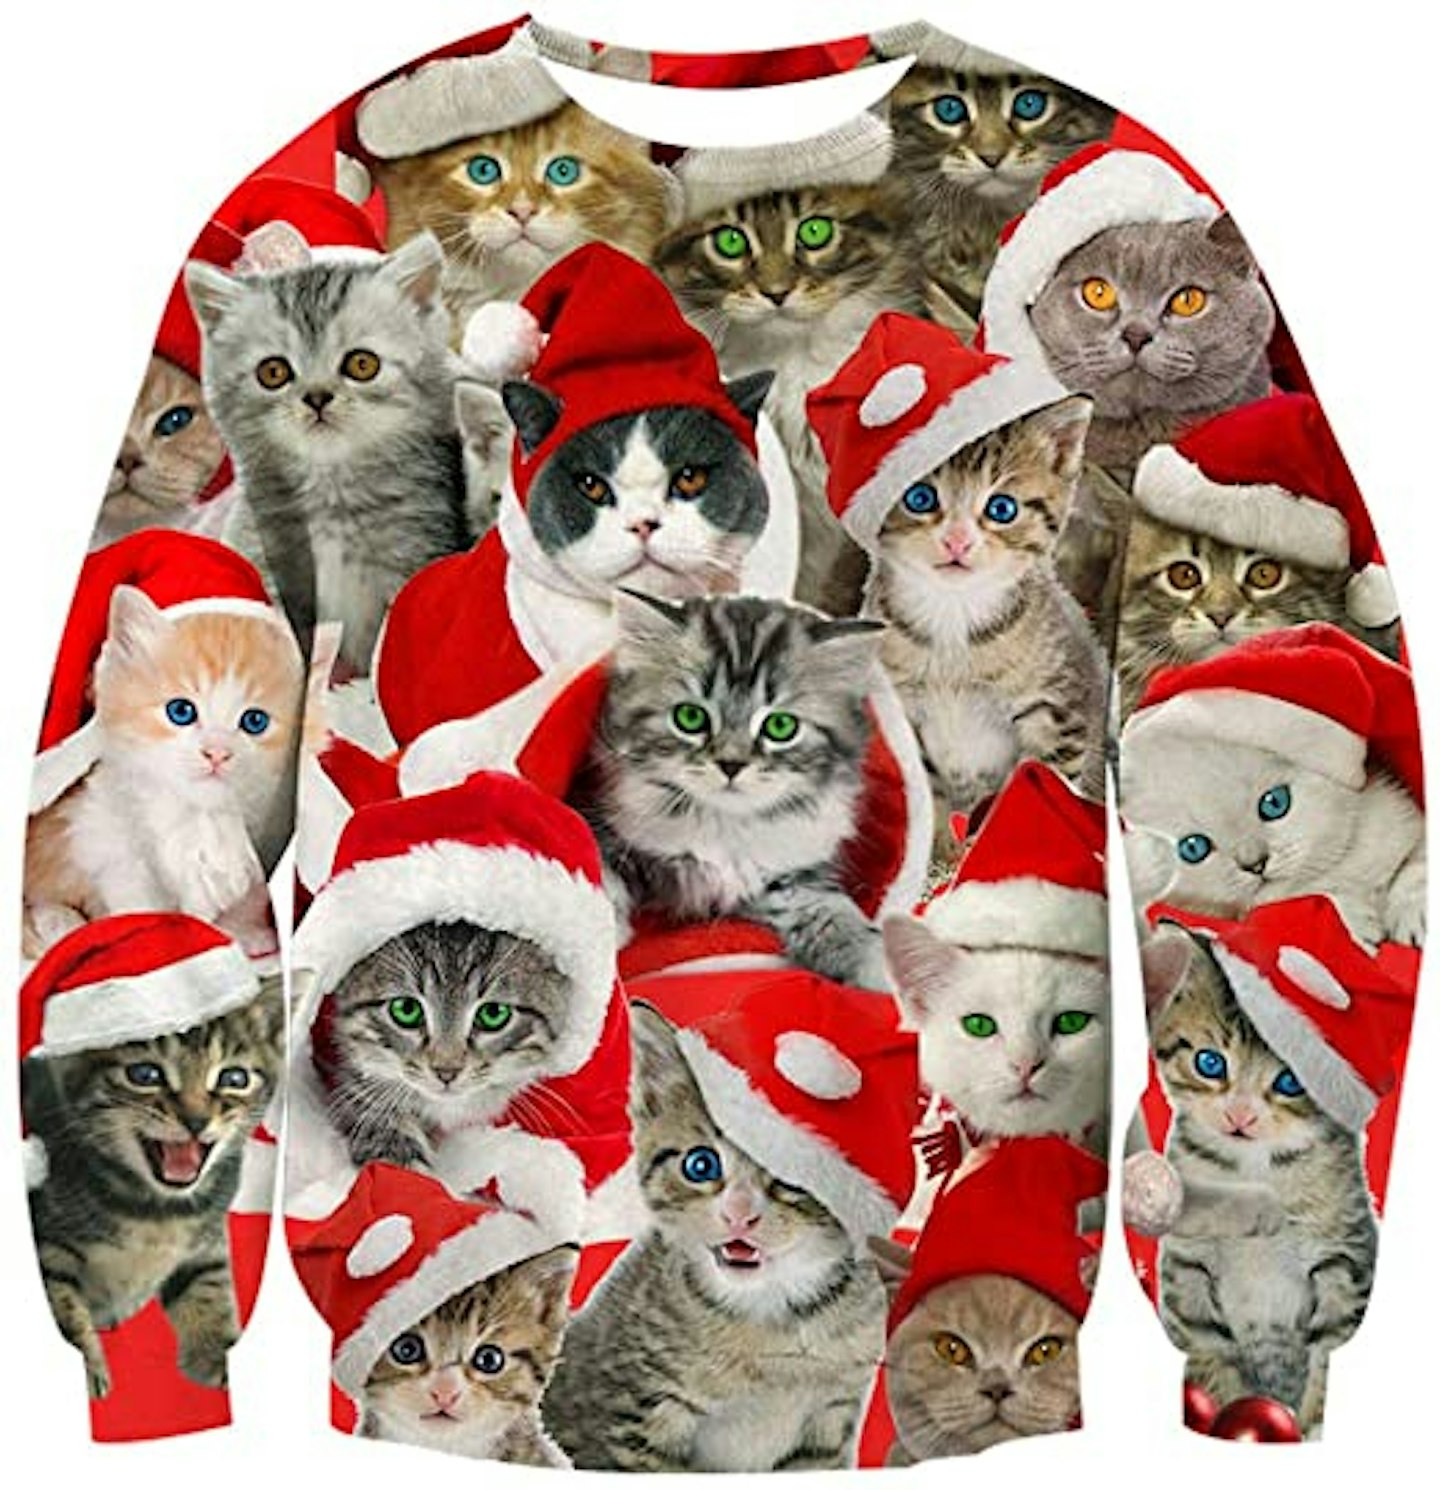 Cats in Hats Christmas Jumper